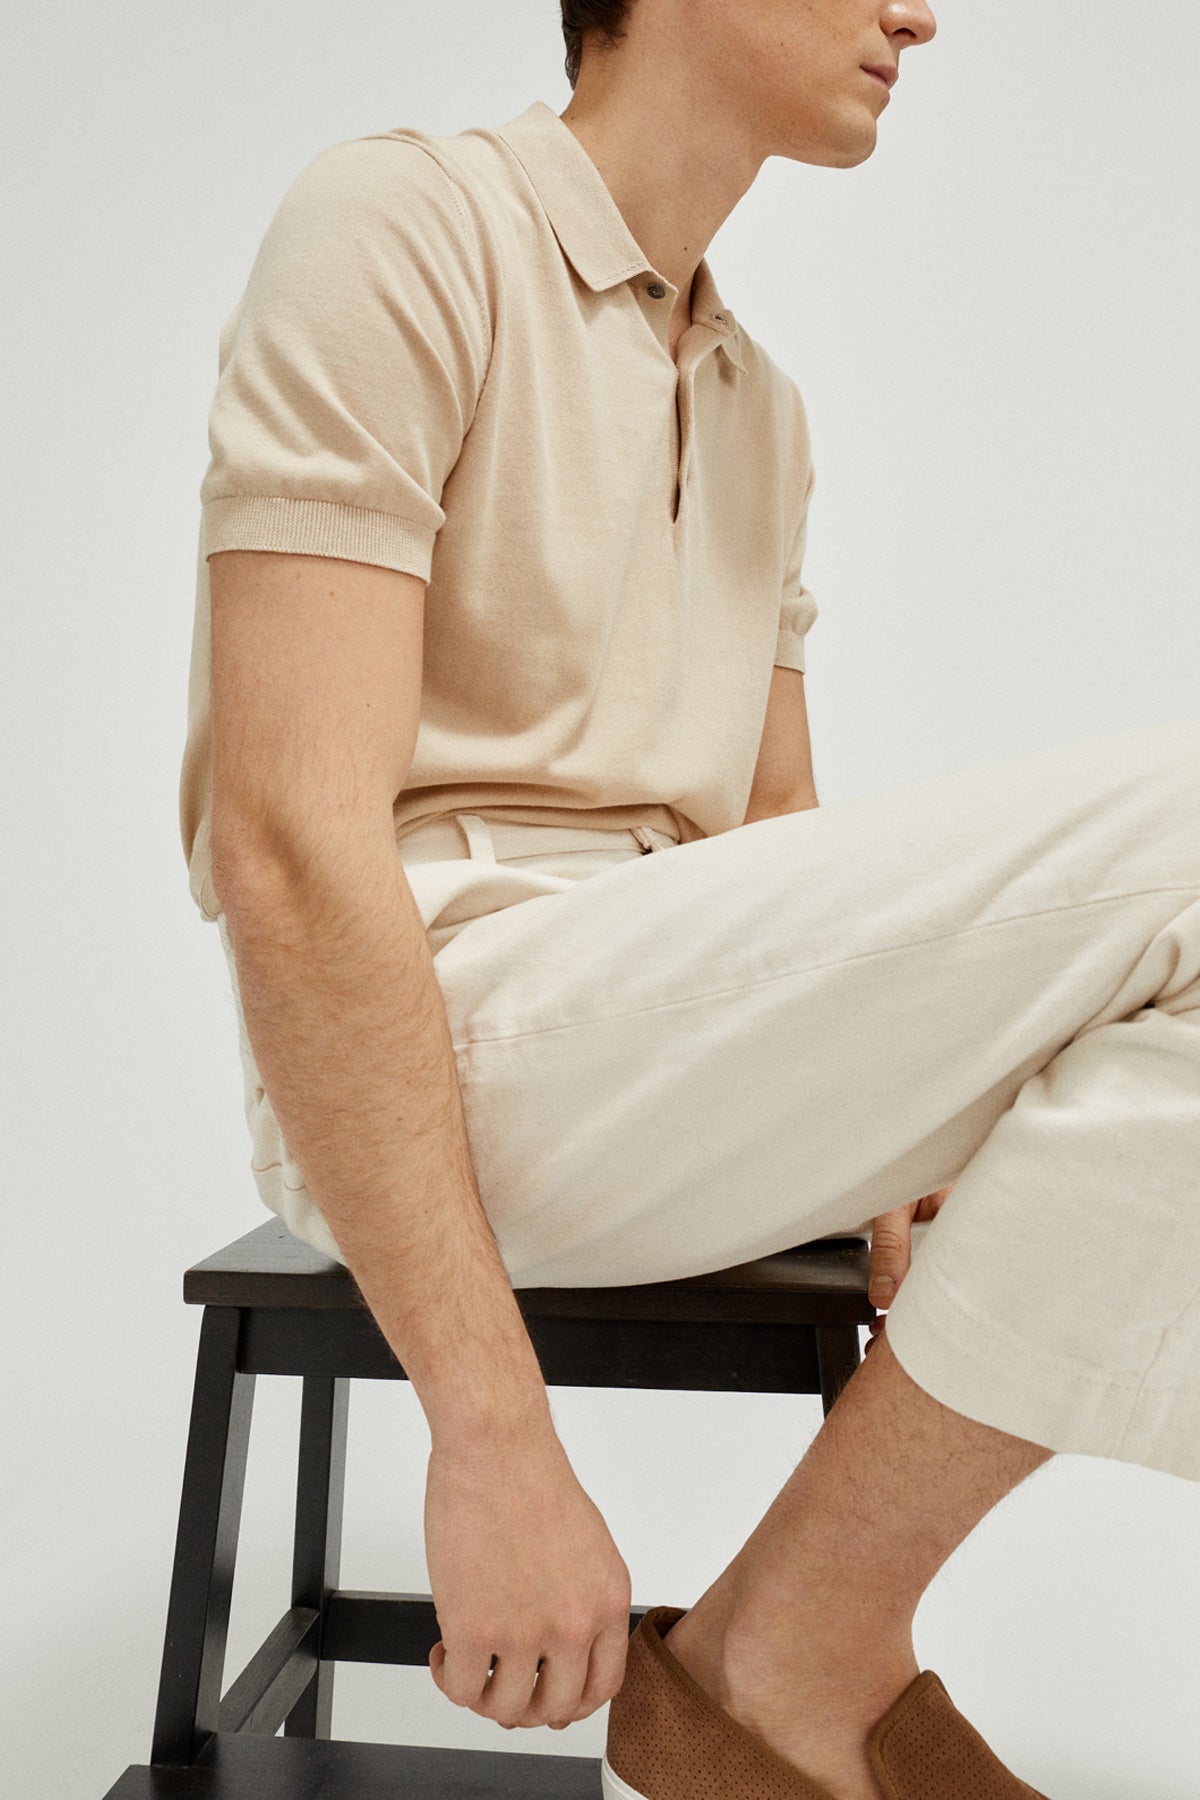 Sand | The Organic Cotton Polo – Imperfect Version